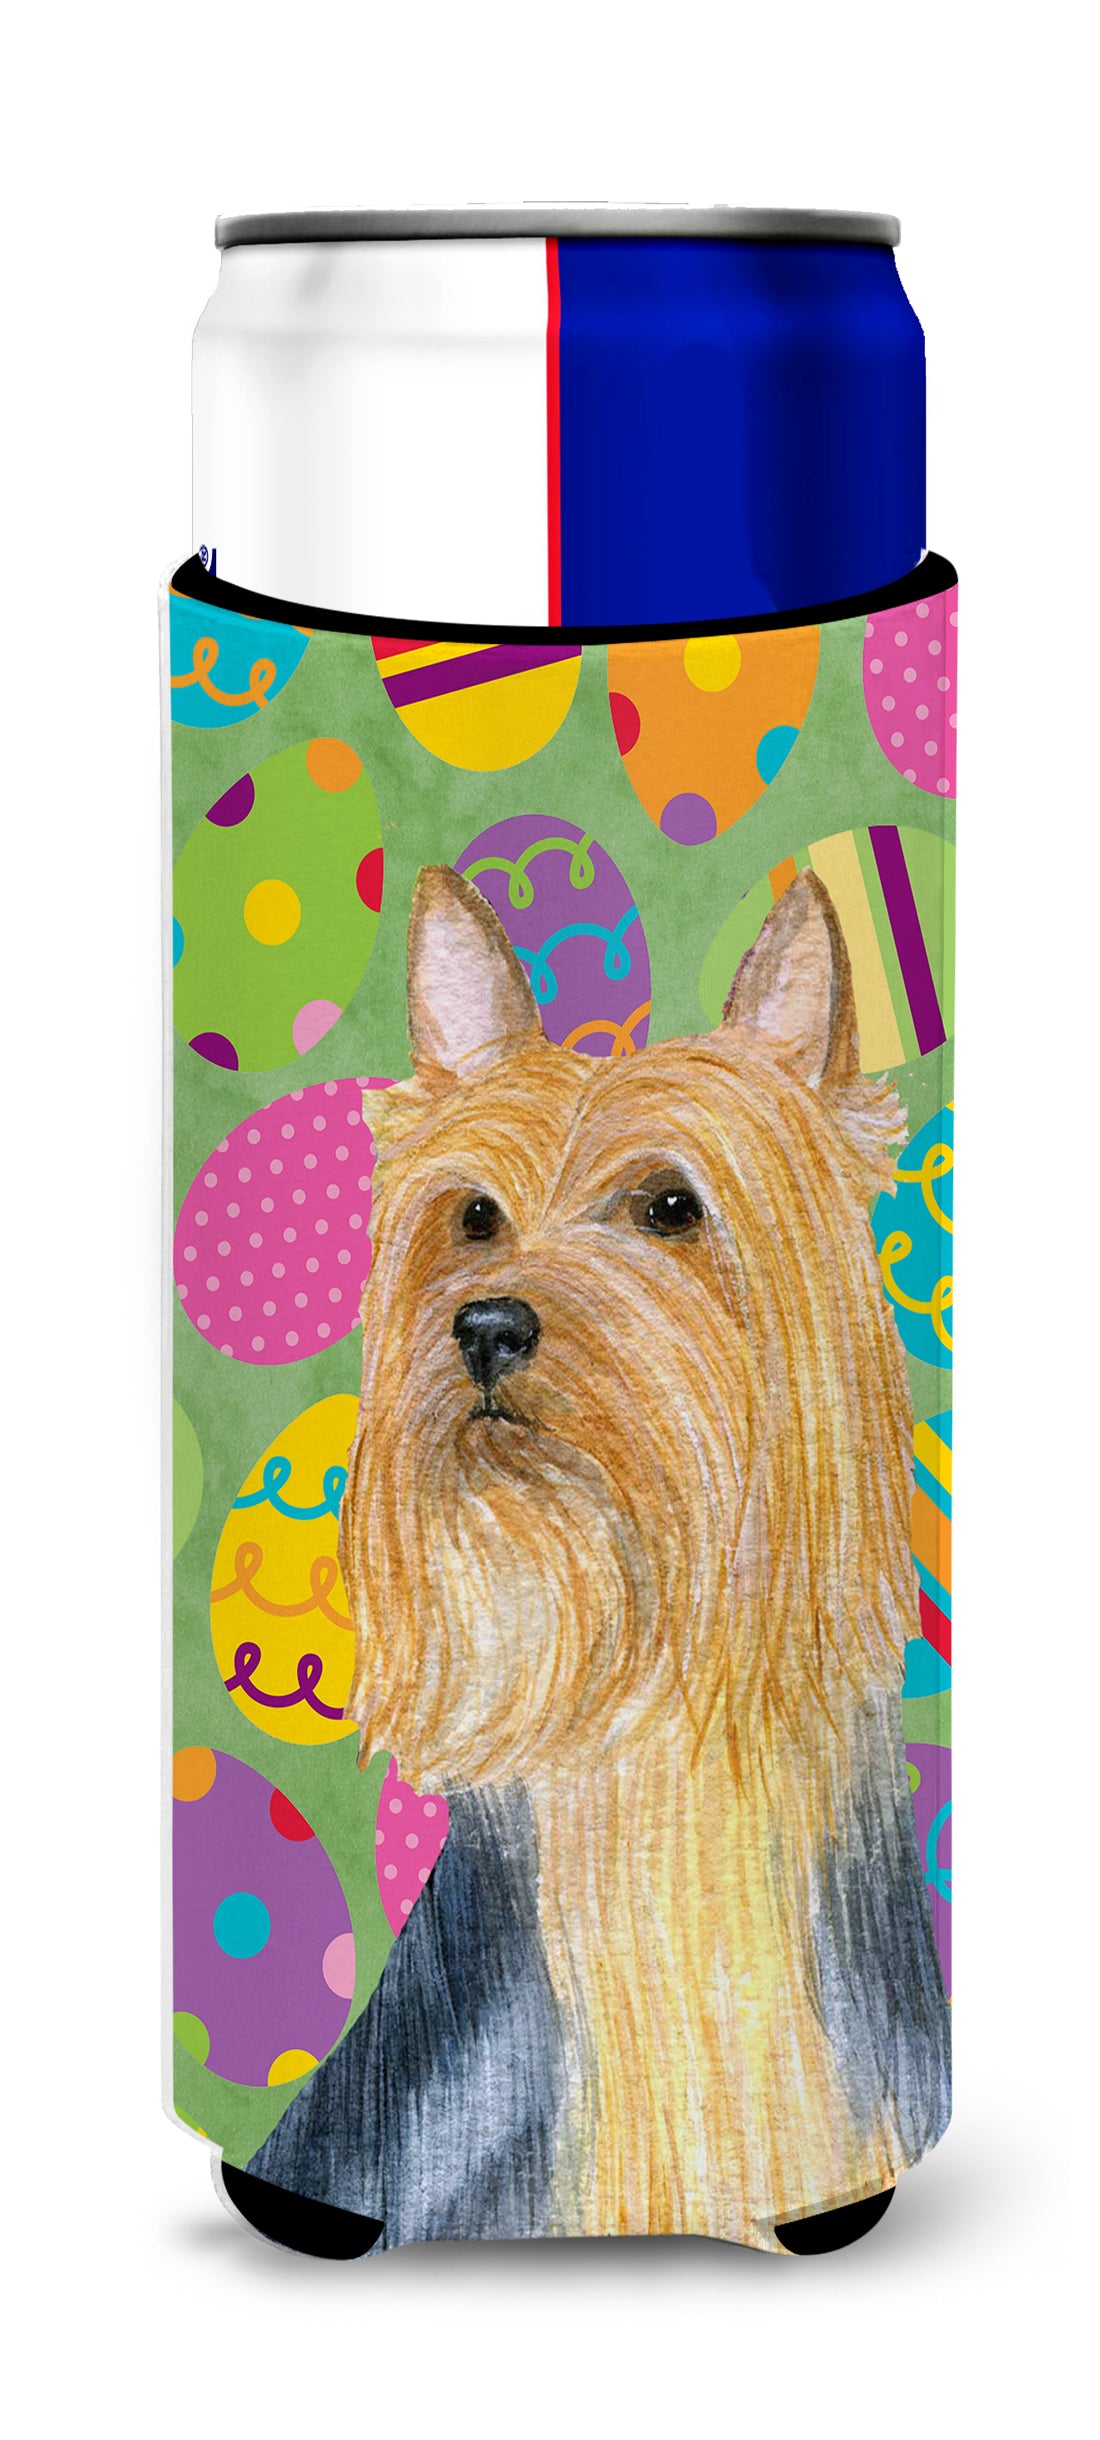 Silky Terrier Easter Eggtravaganza Ultra Beverage Insulators for slim cans LH9406MUK.